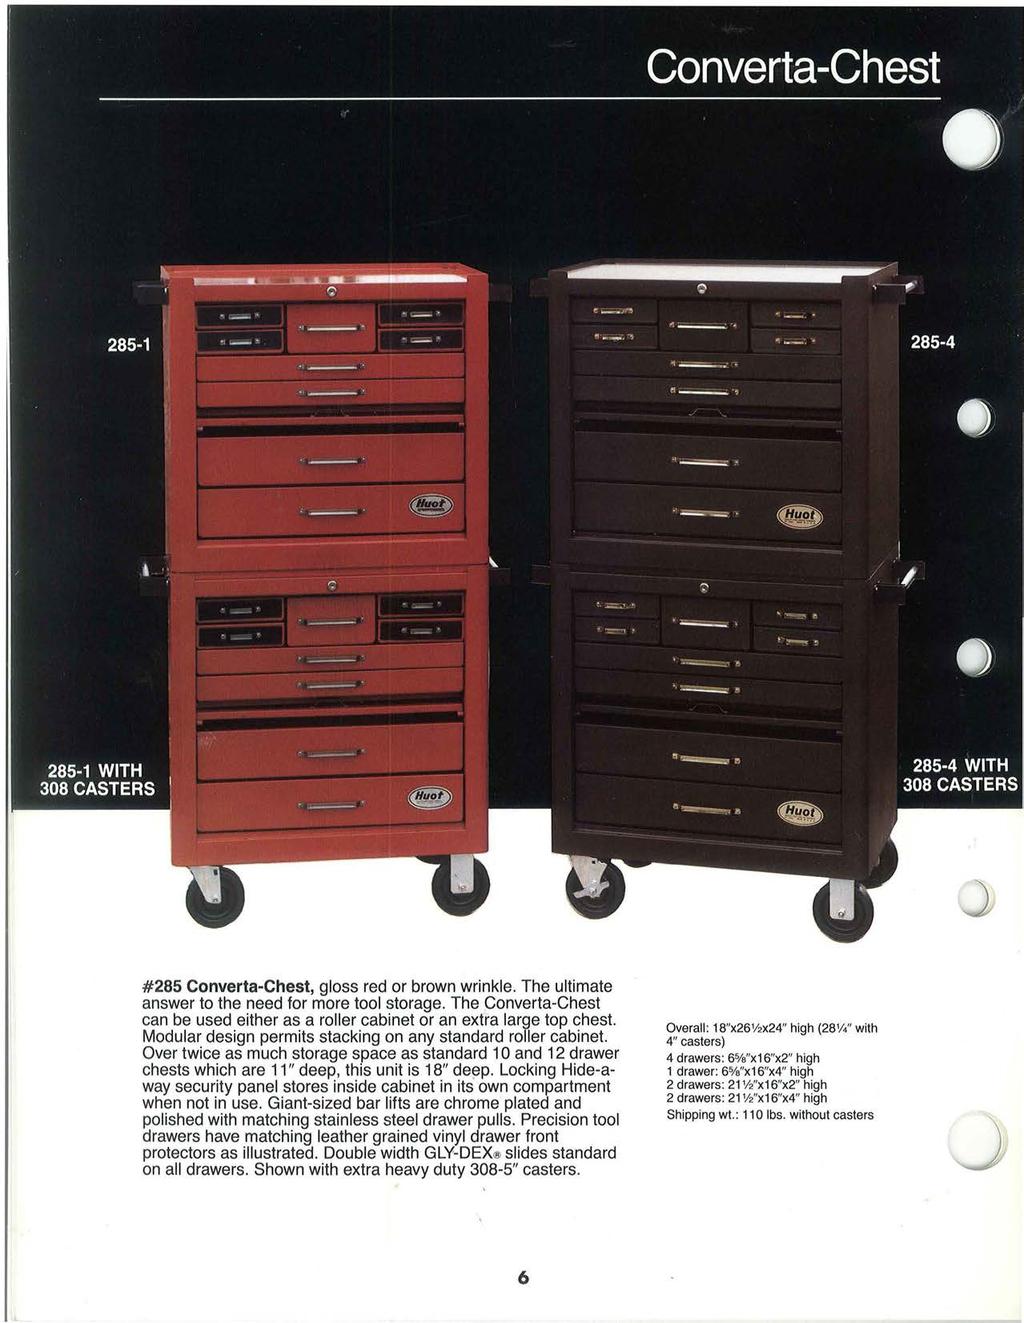 #285 Converta-Chest, gloss red or brown wrinkle. The ultimate answer to the need for more tool storage. The Converta-Chest can be used either as a roller cabinet or an extra large top chest.